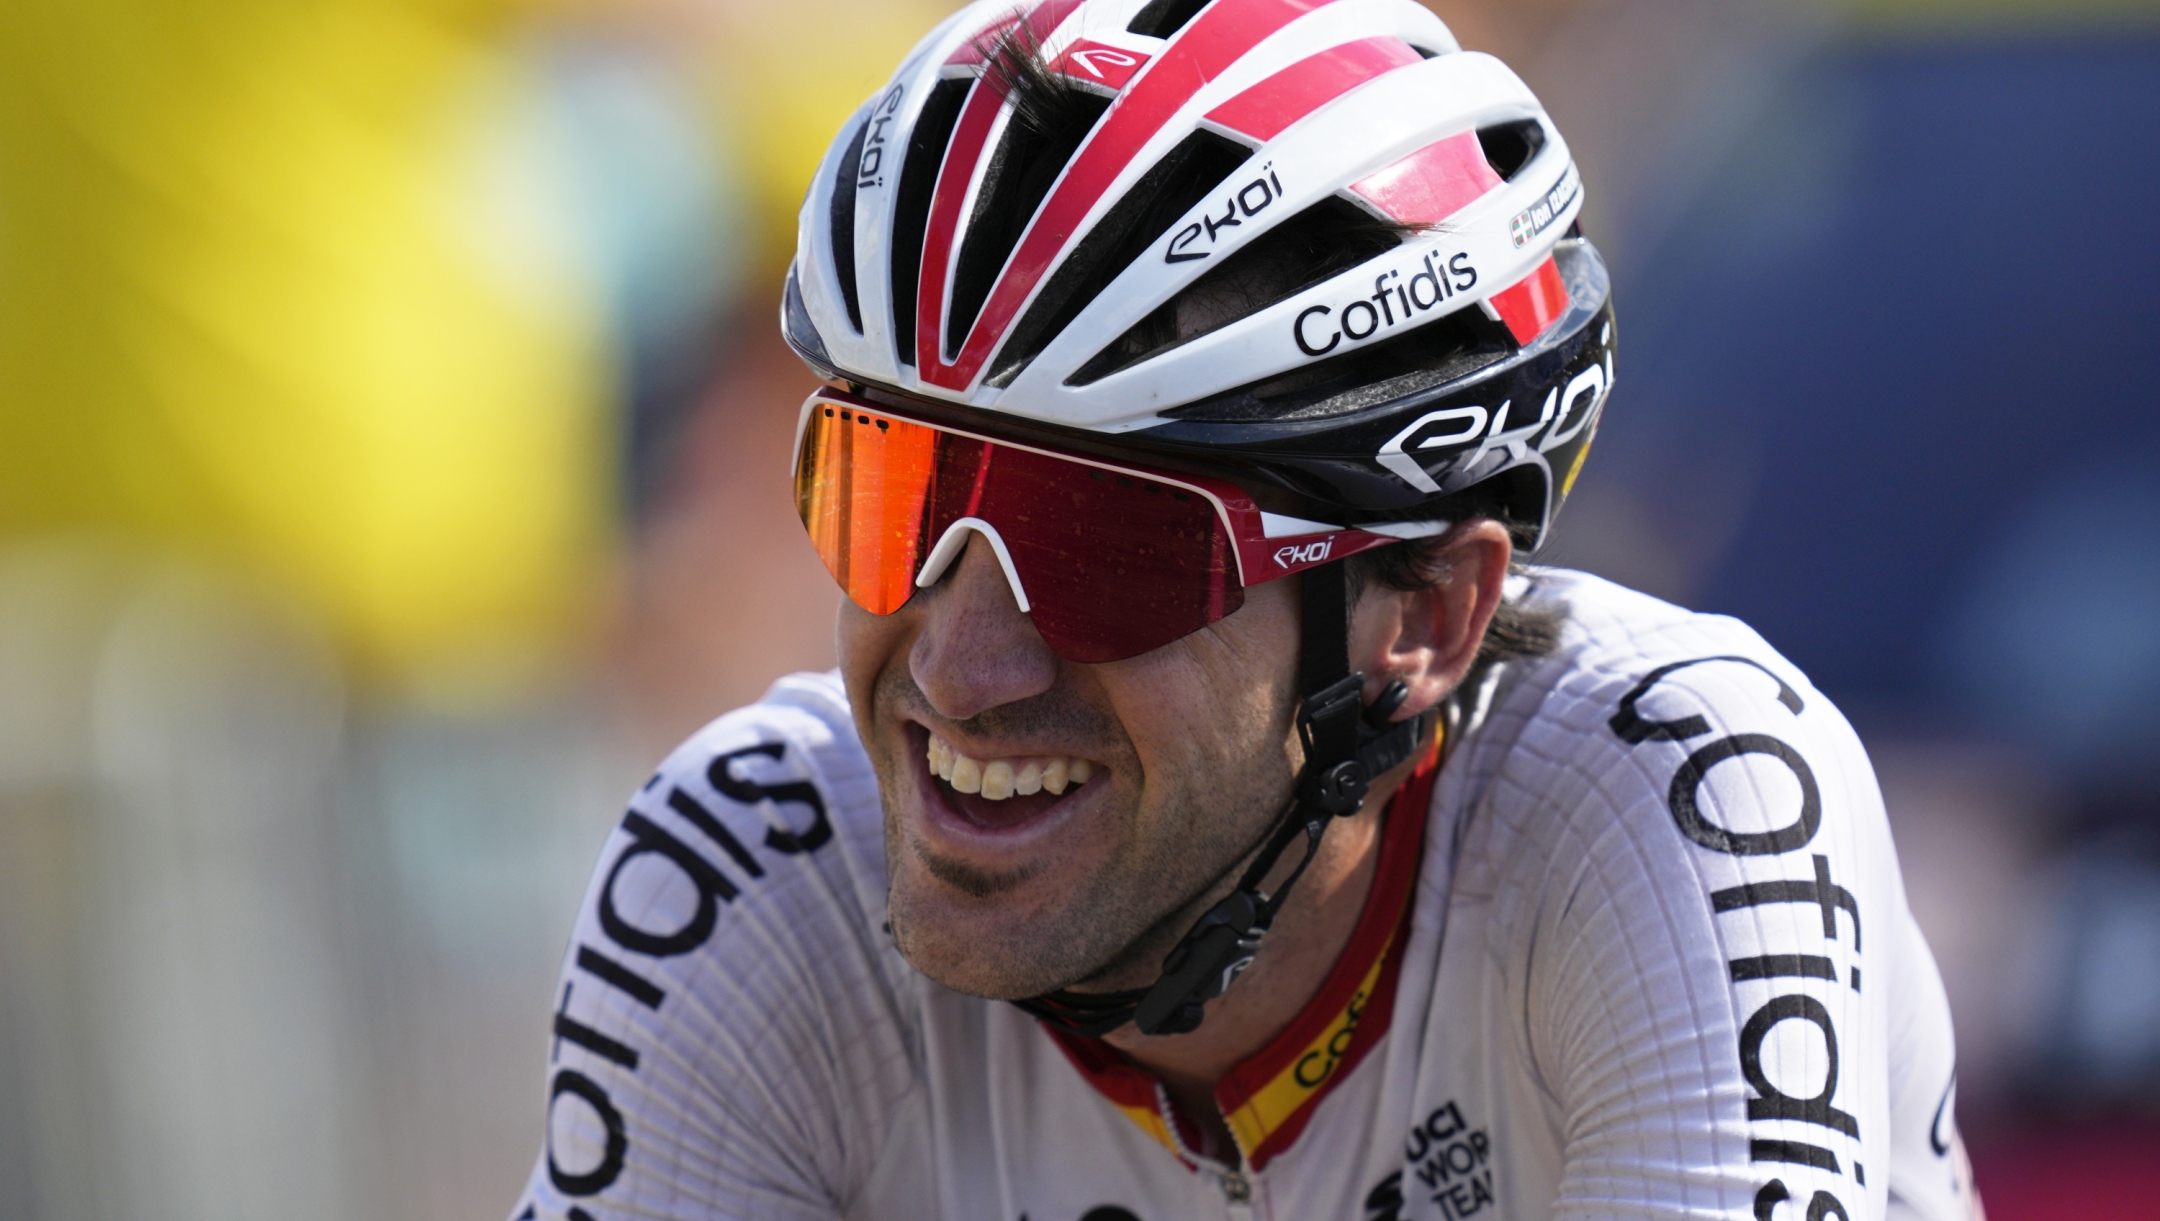 Spain's Ion Izagirre smiles as he crosses the finish line to win the twelfth stage of the Tour de France cycling race over 169 kilometers (105 miles) with start in Roanne and finish in Belleville-en-Beaujolais, France, Thursday, July 13, 2023. (AP Photo/Daniel Cole)